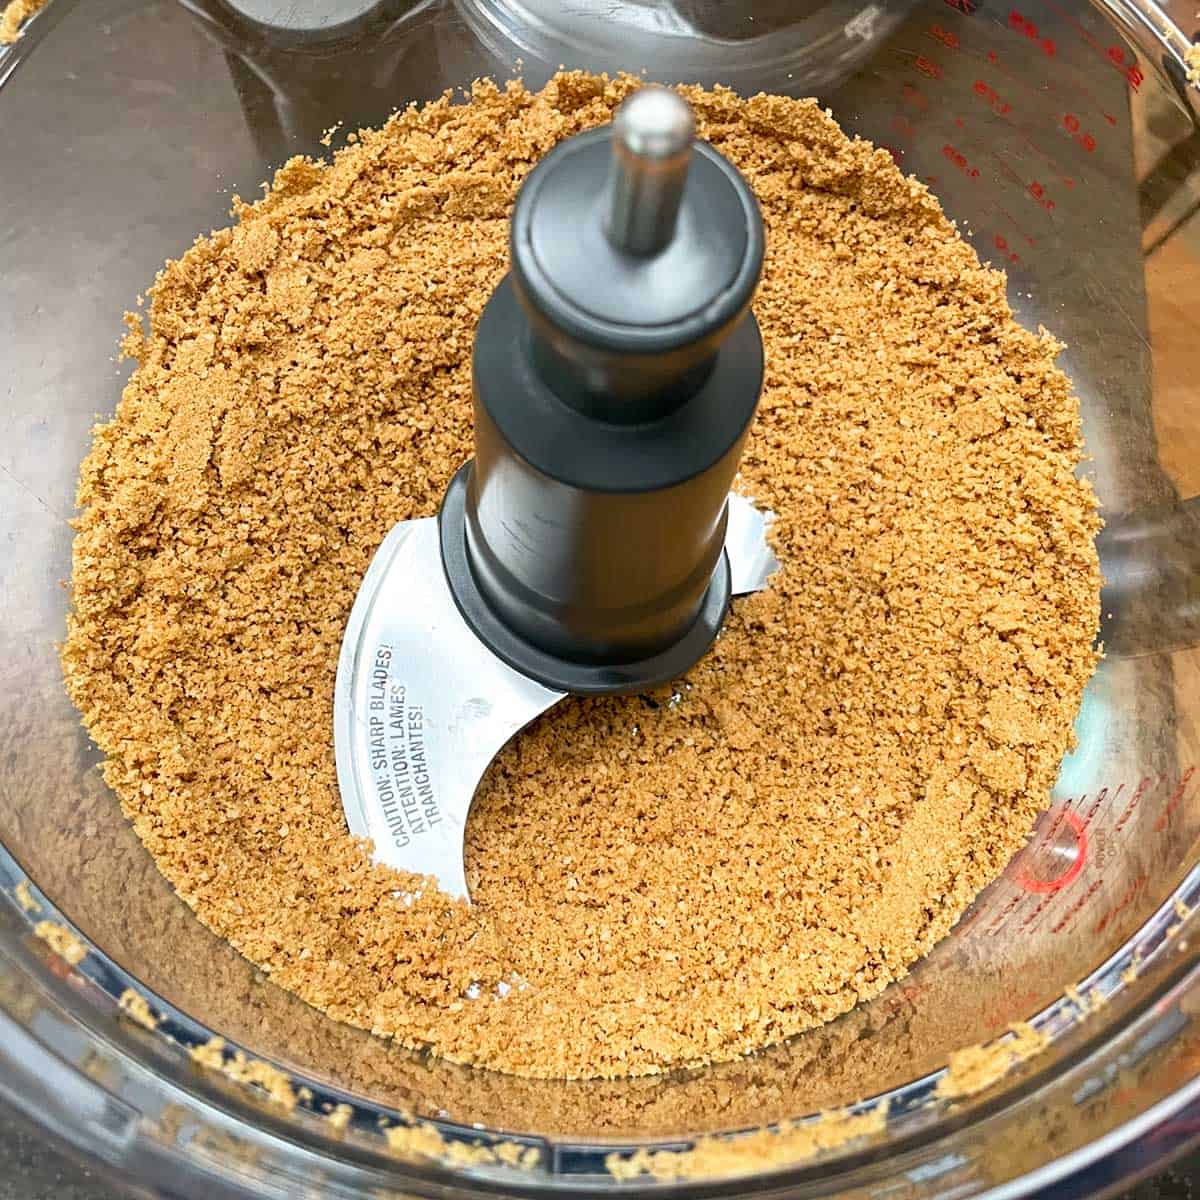 Graham crackers and macadamia nuts pulsed to a crumb texture in a food processor.